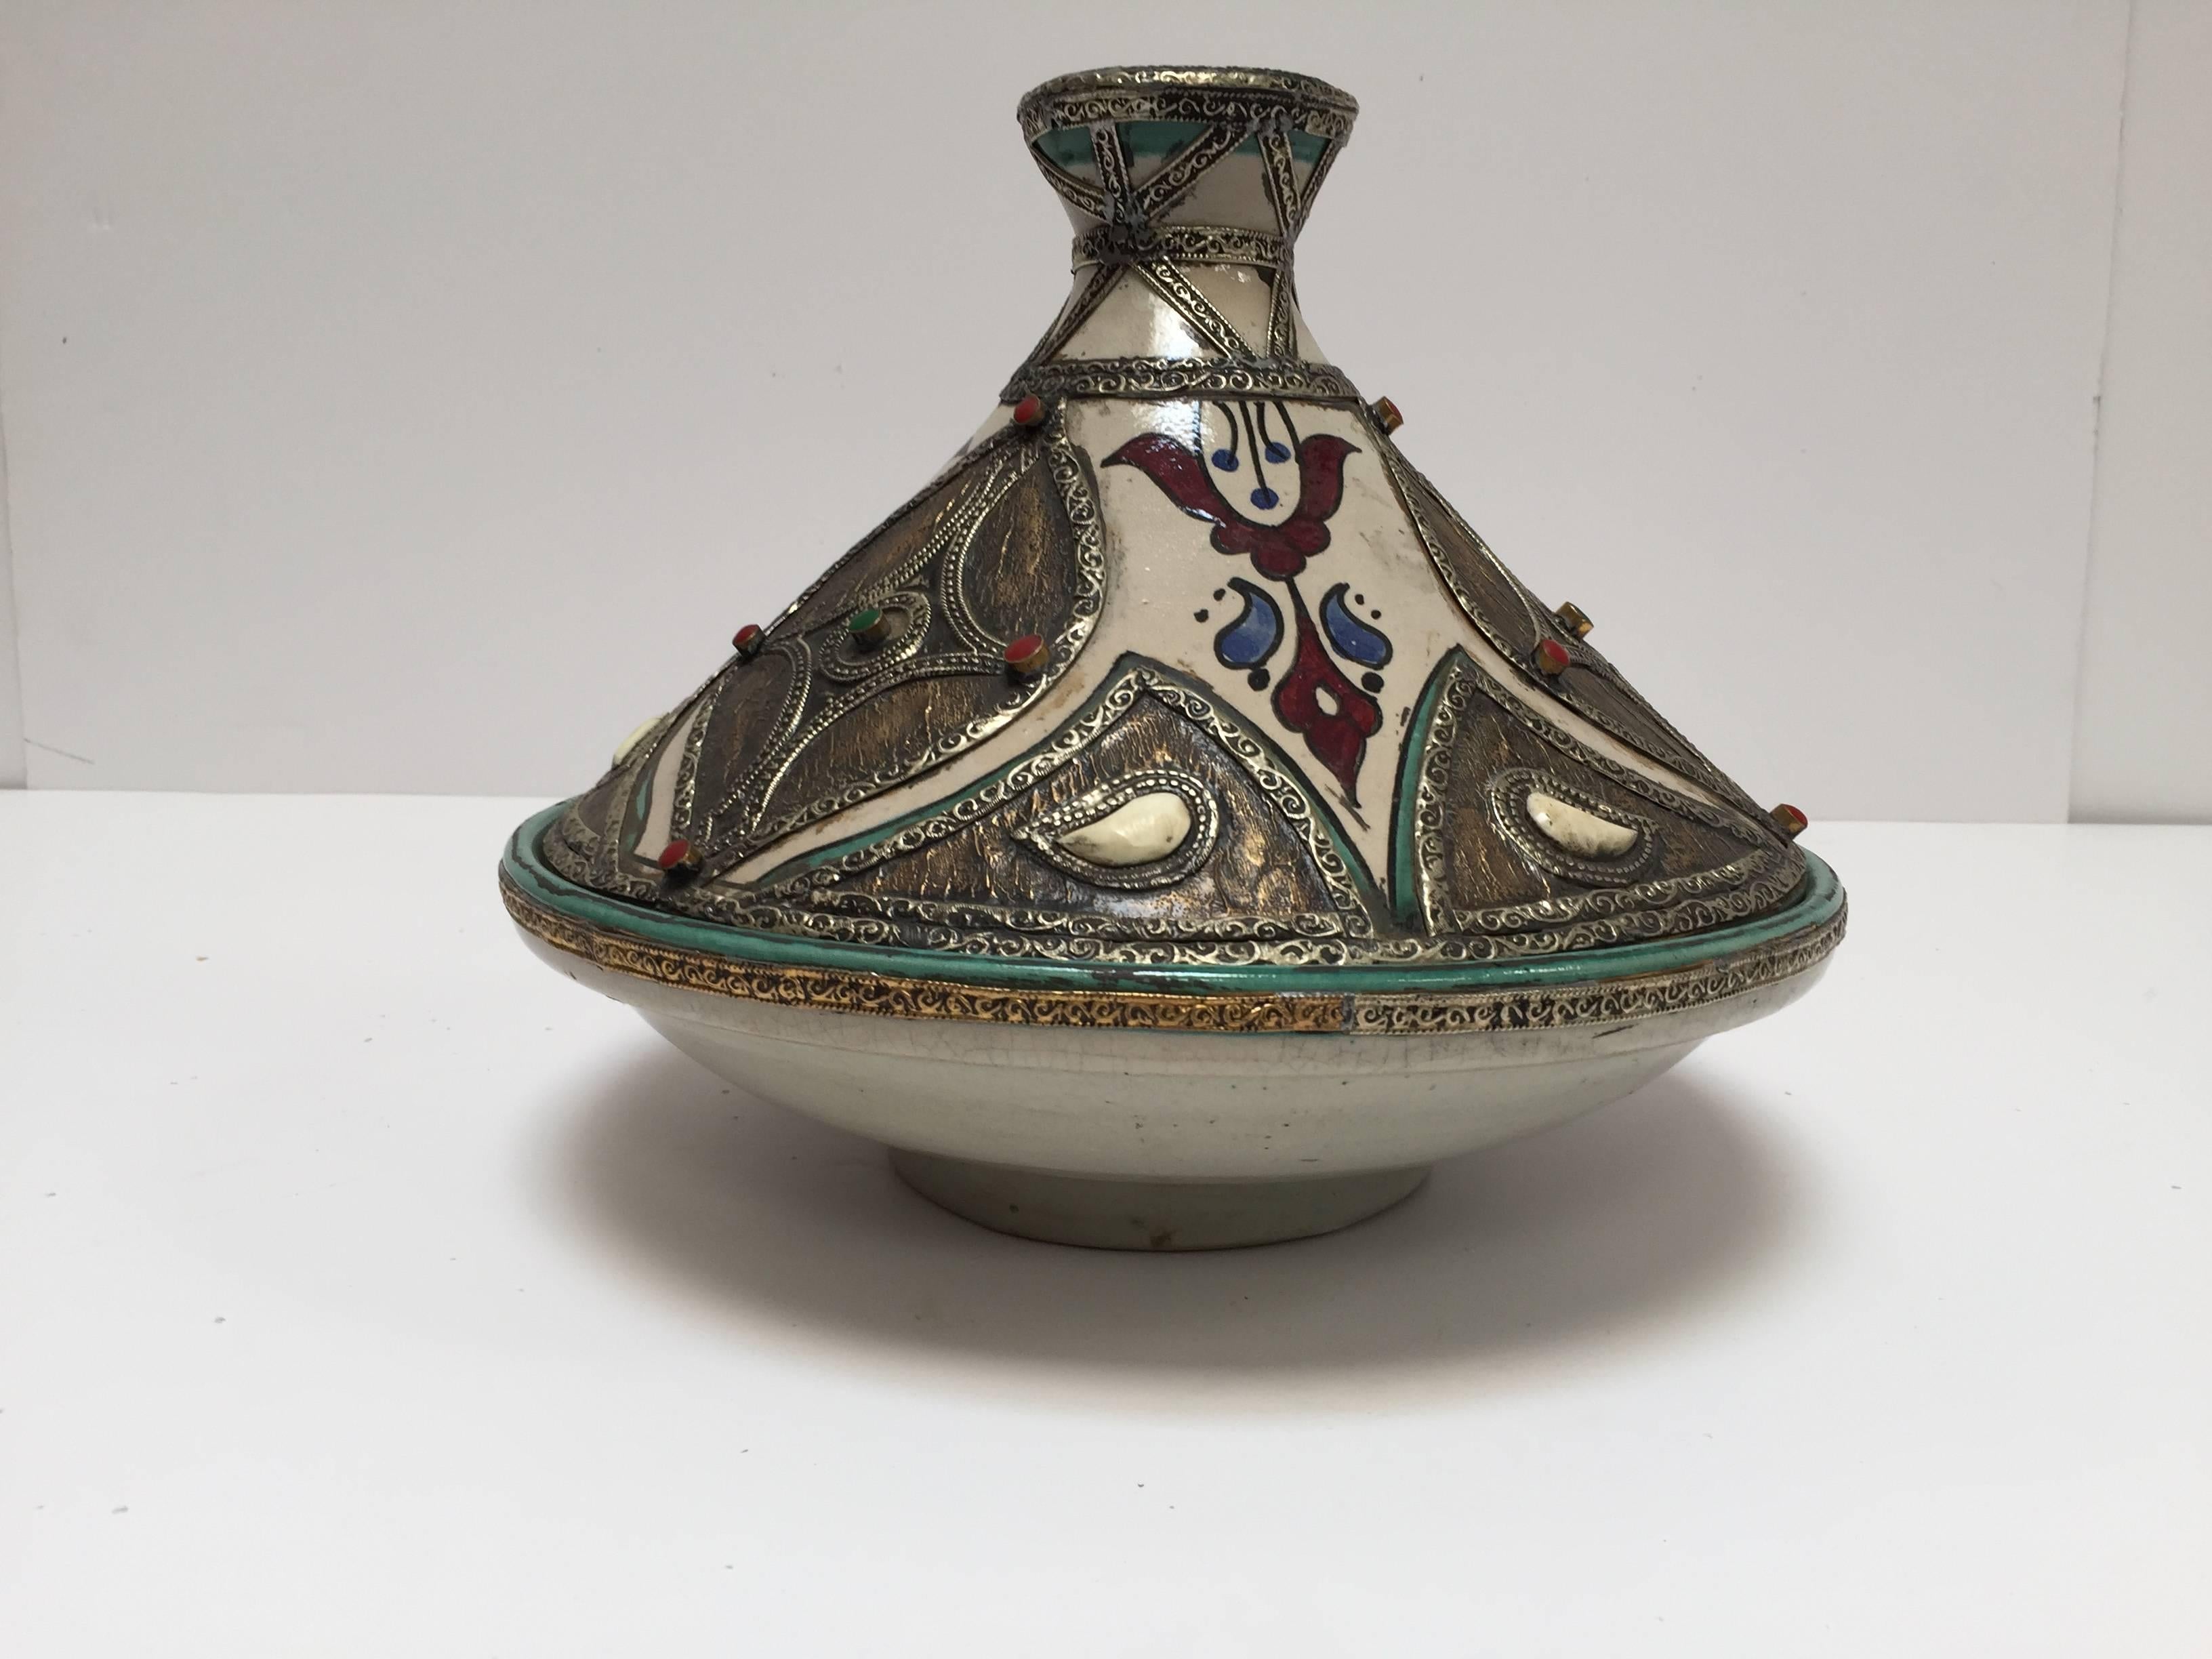 Moroccan ceramic decorative tajine polychrome with leather, stones and metal overlay with conical overlay lid.
The bottom is a circular bowl and the top of the tagine is distinctively shaped into a cone.
Handcrafted and hand-painted with Moorish